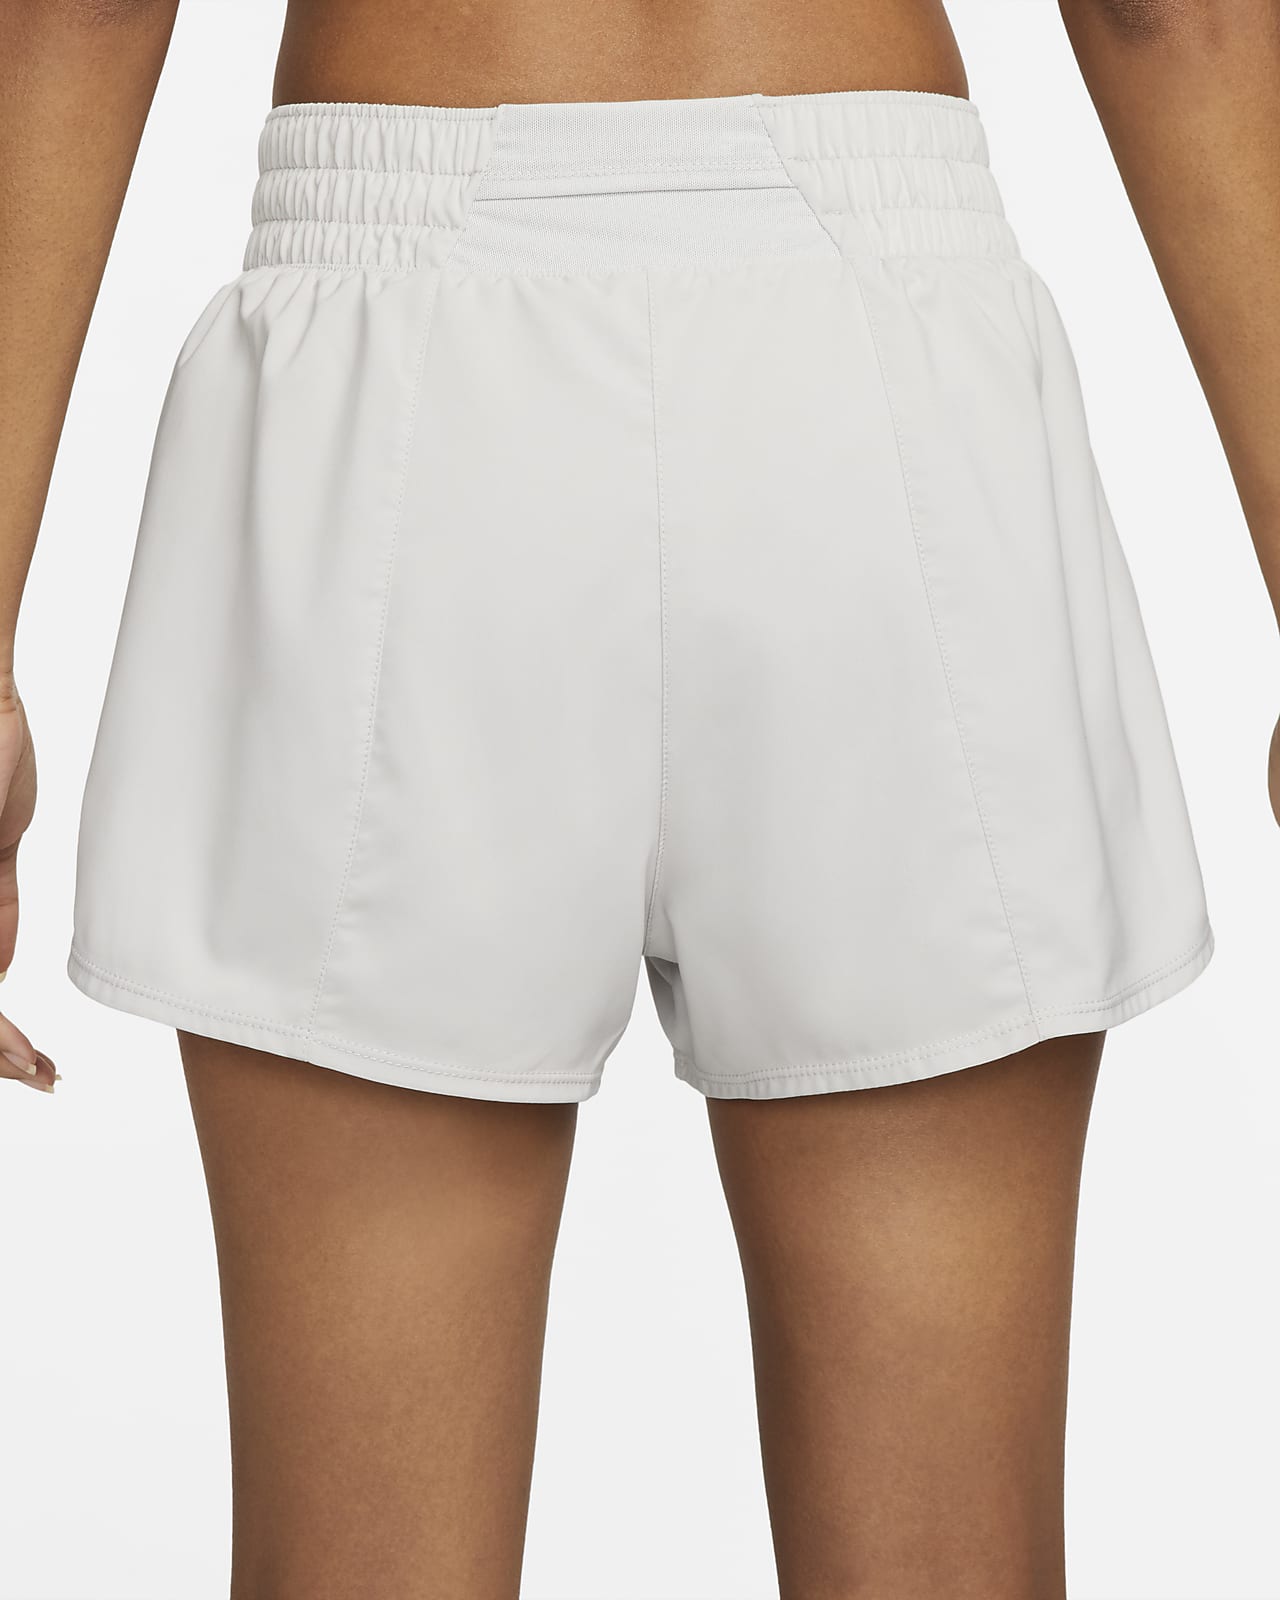 Nike Dri-FIT SE Women's High-Waisted 4 Shorts with Pockets.